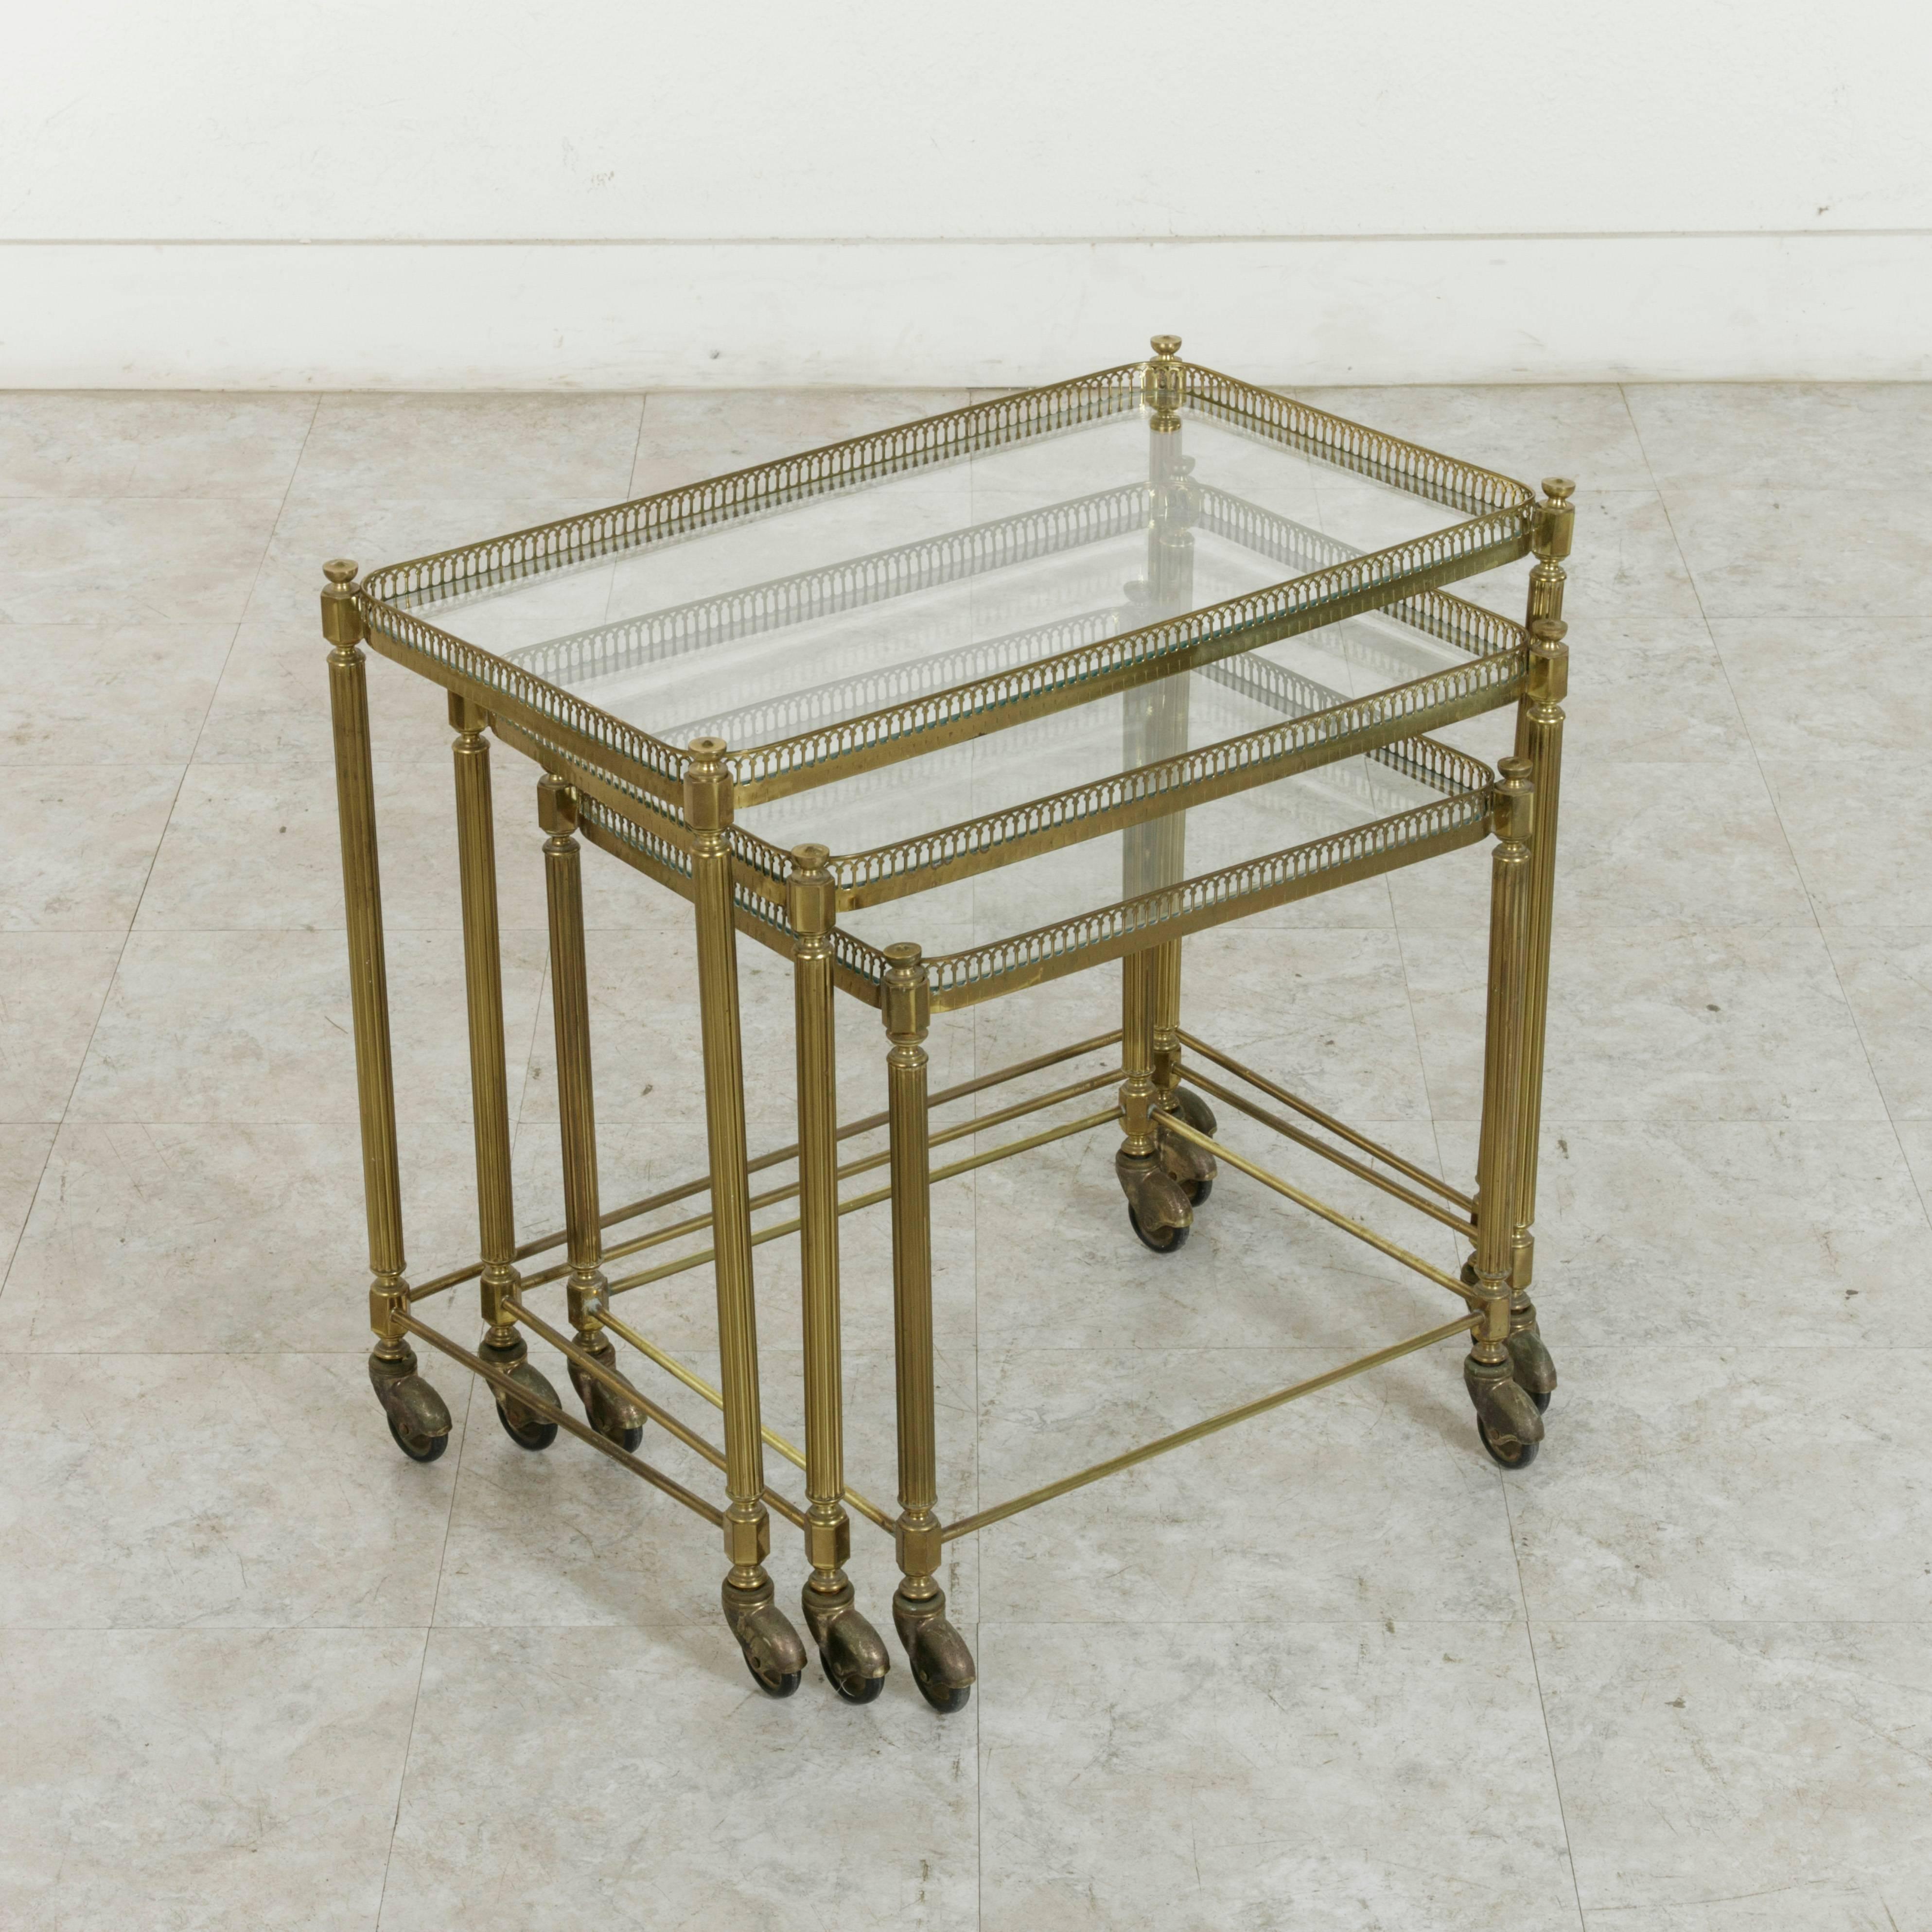 This set of three mid-twentieth century French brass nesting tables features glass tops surrounded by pierced brass galleries. Supported by fluted column legs, they are finished with casters for easy mobility. The largest table measures 24 inches